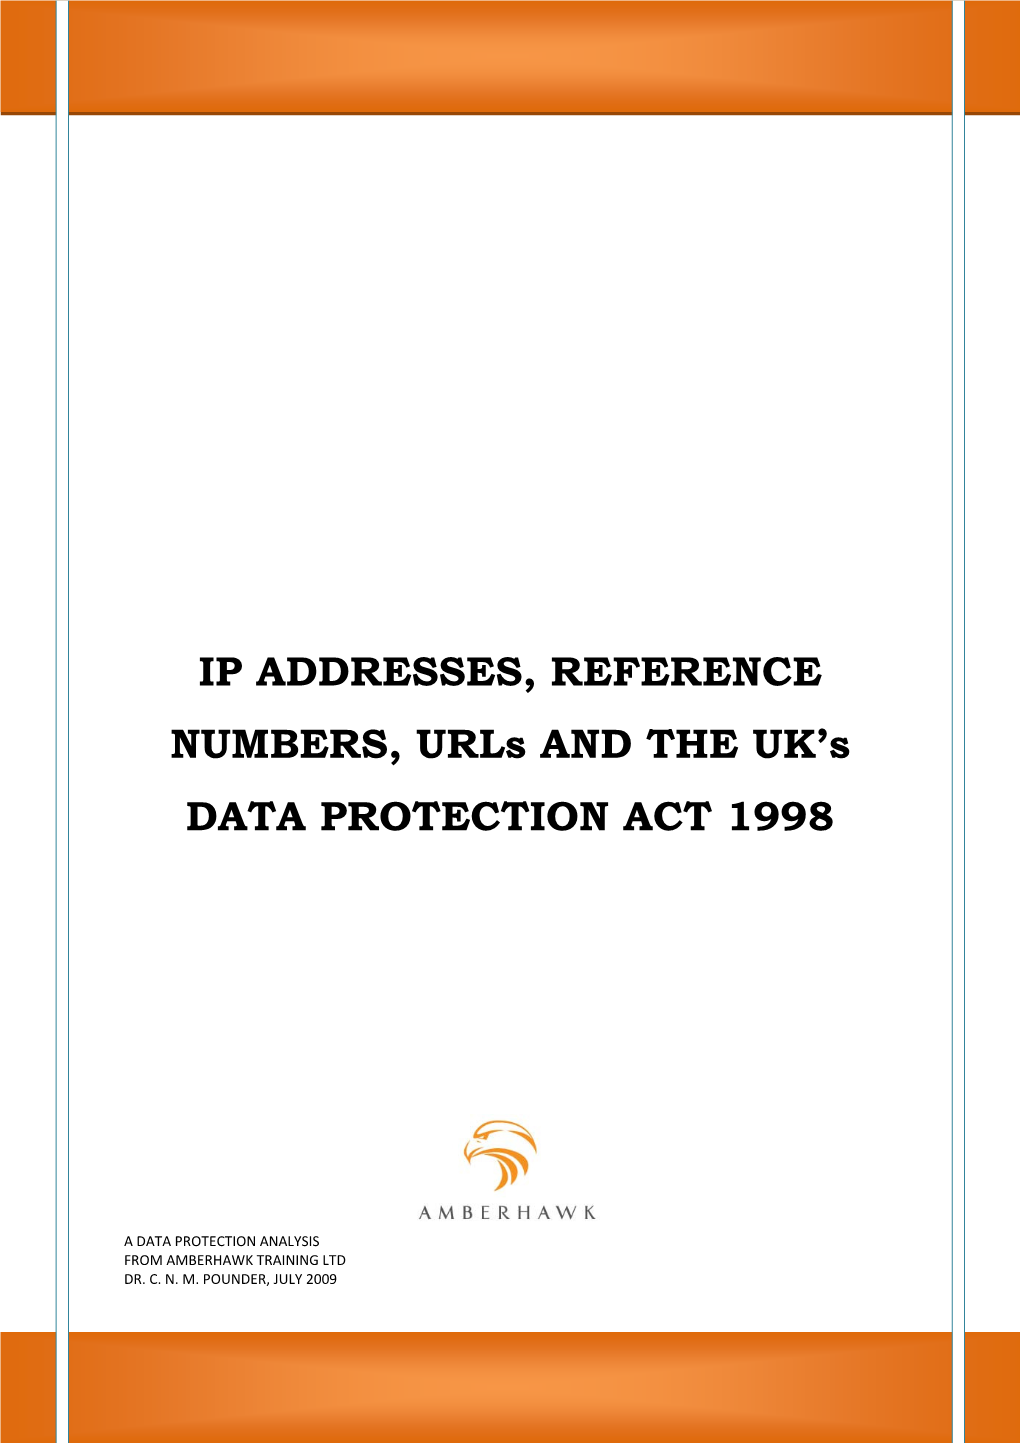 IP ADDRESSES, REFERENCE NUMBERS, Urls and the UK's